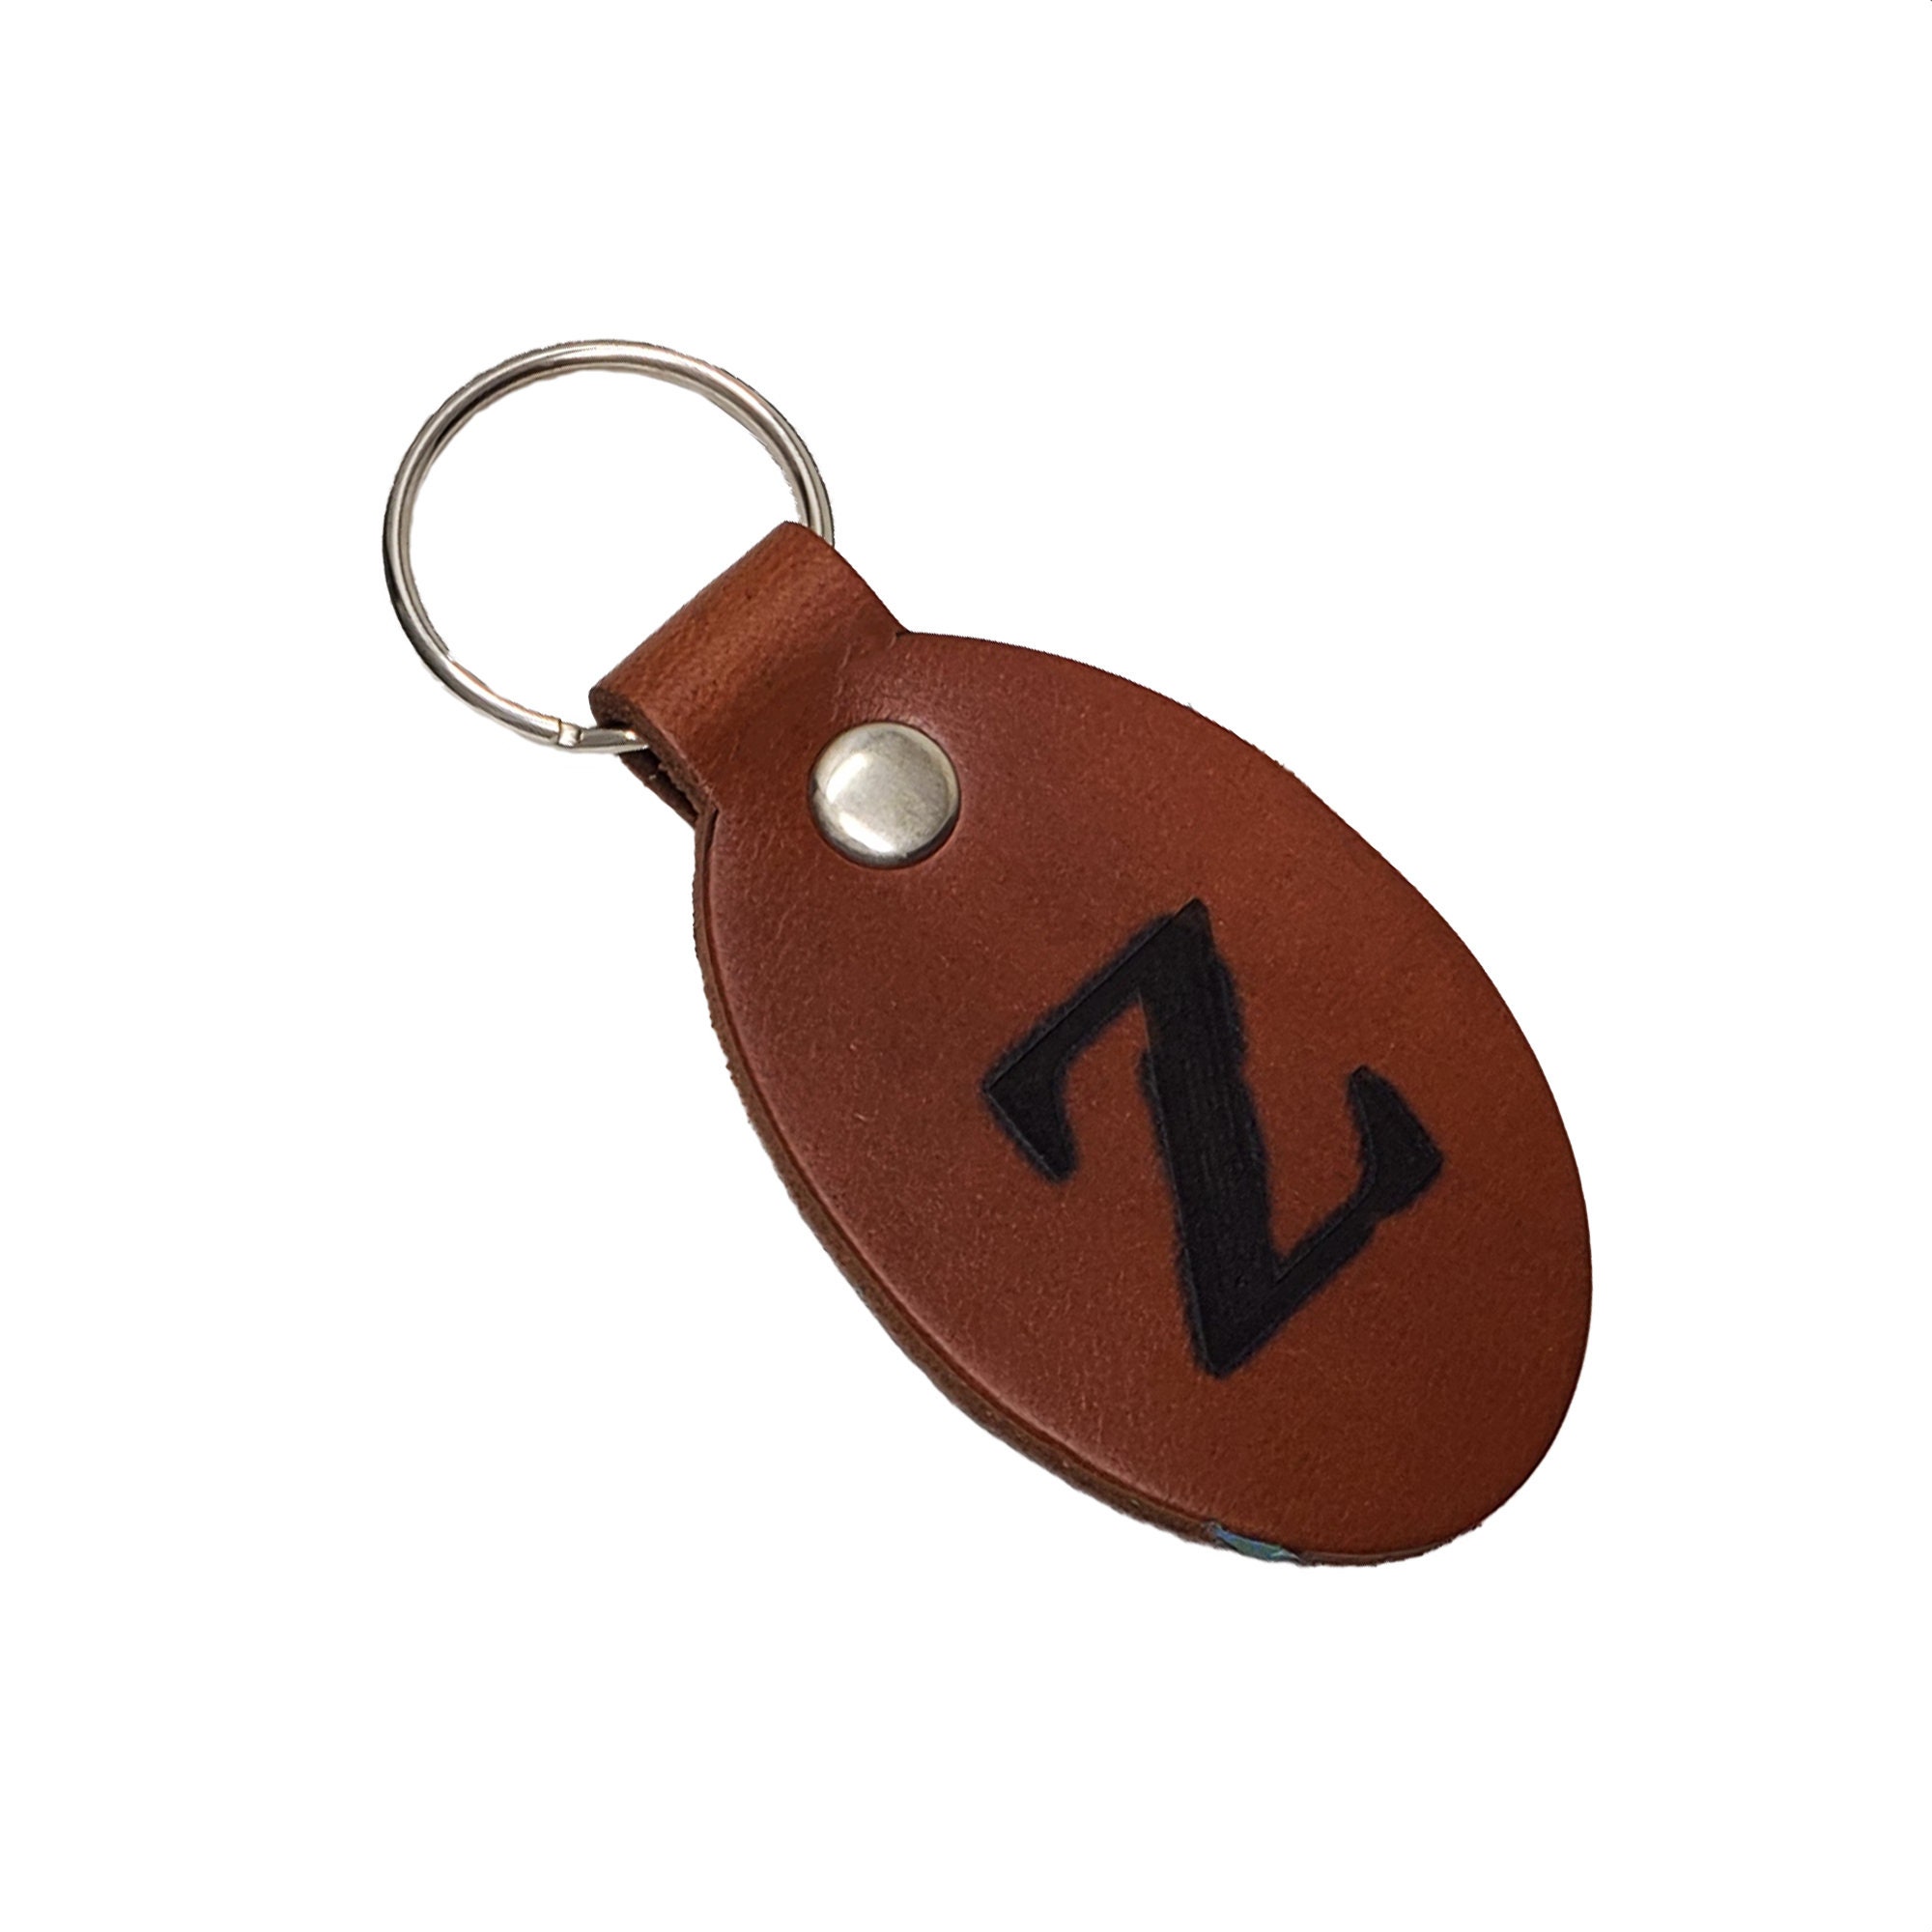  Blank Leather Keychains ready to be Personalized, 10 pack  Leather Keyrings Blanks